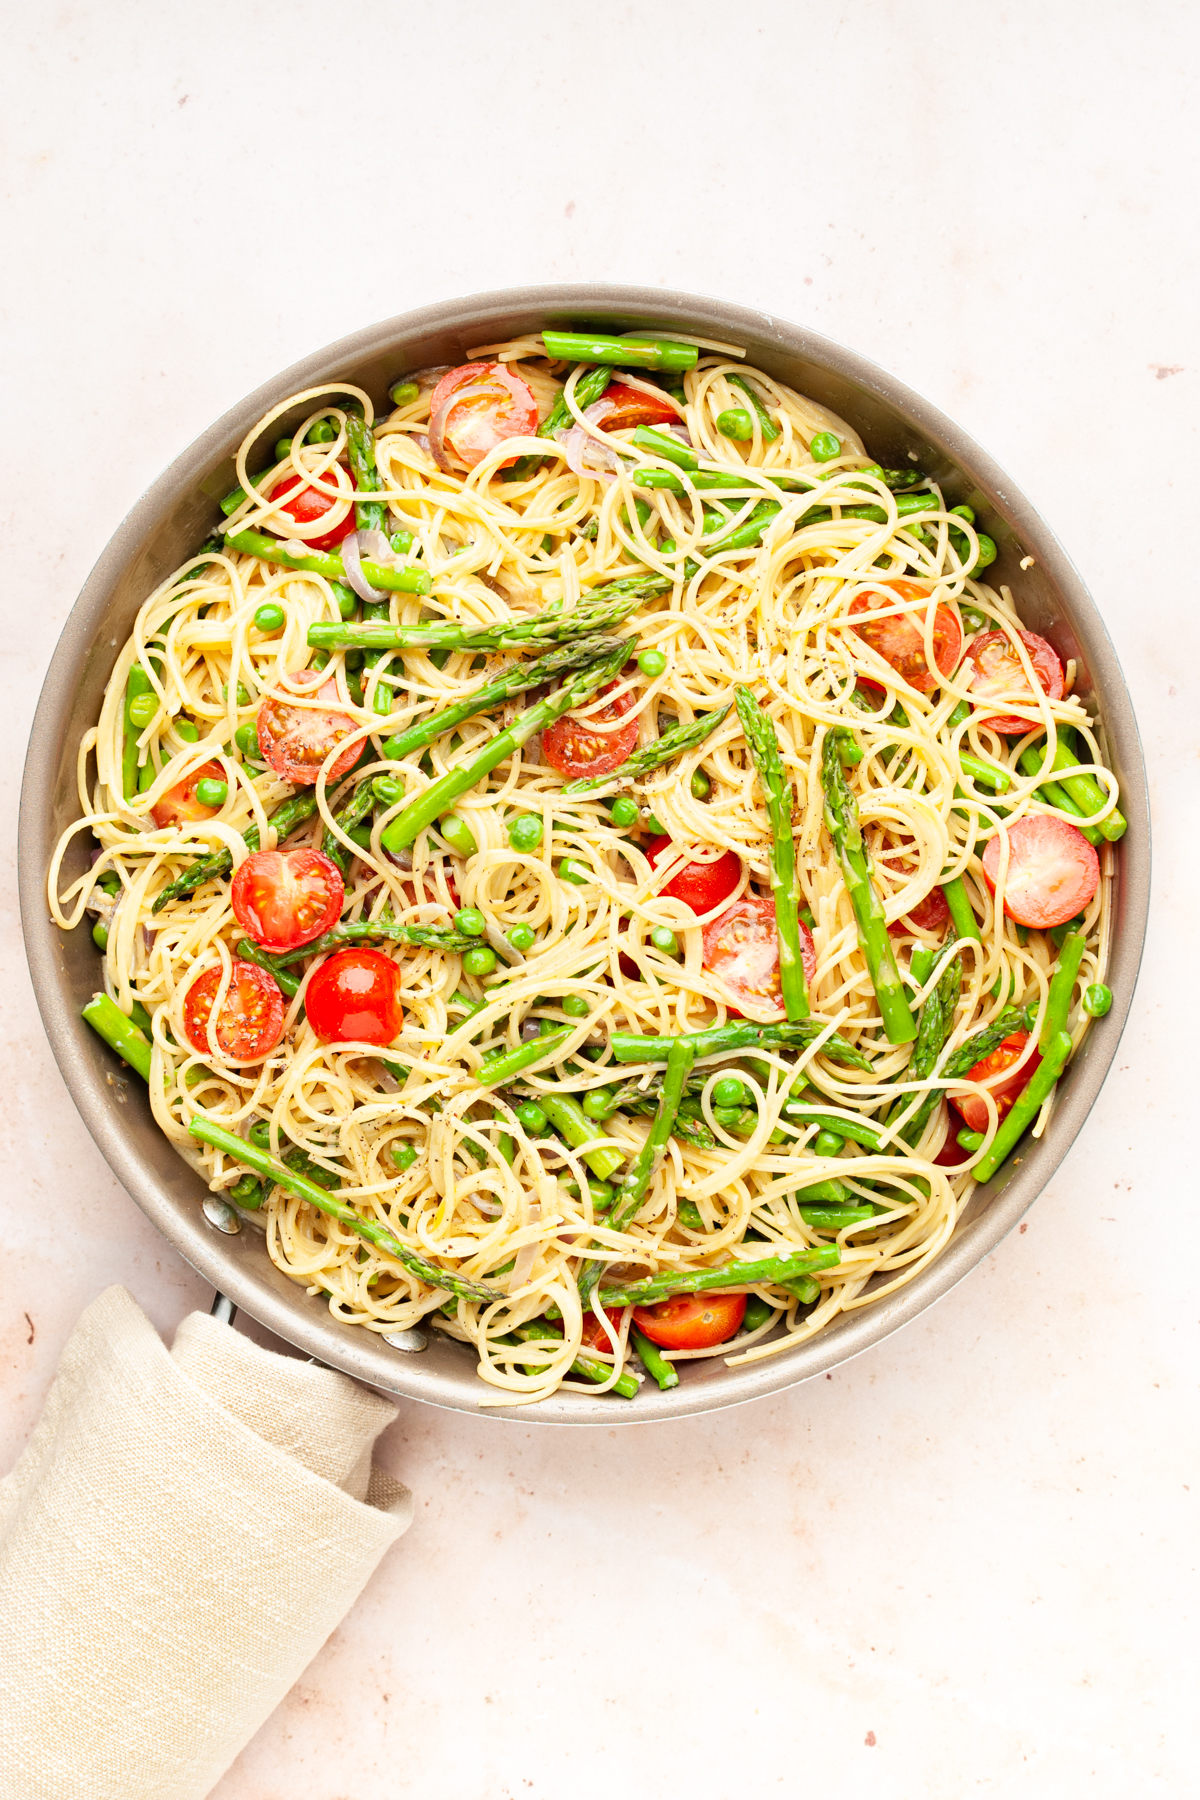 Pasta primavera with asparagus, peas, and cherry tomatoes in a pan.